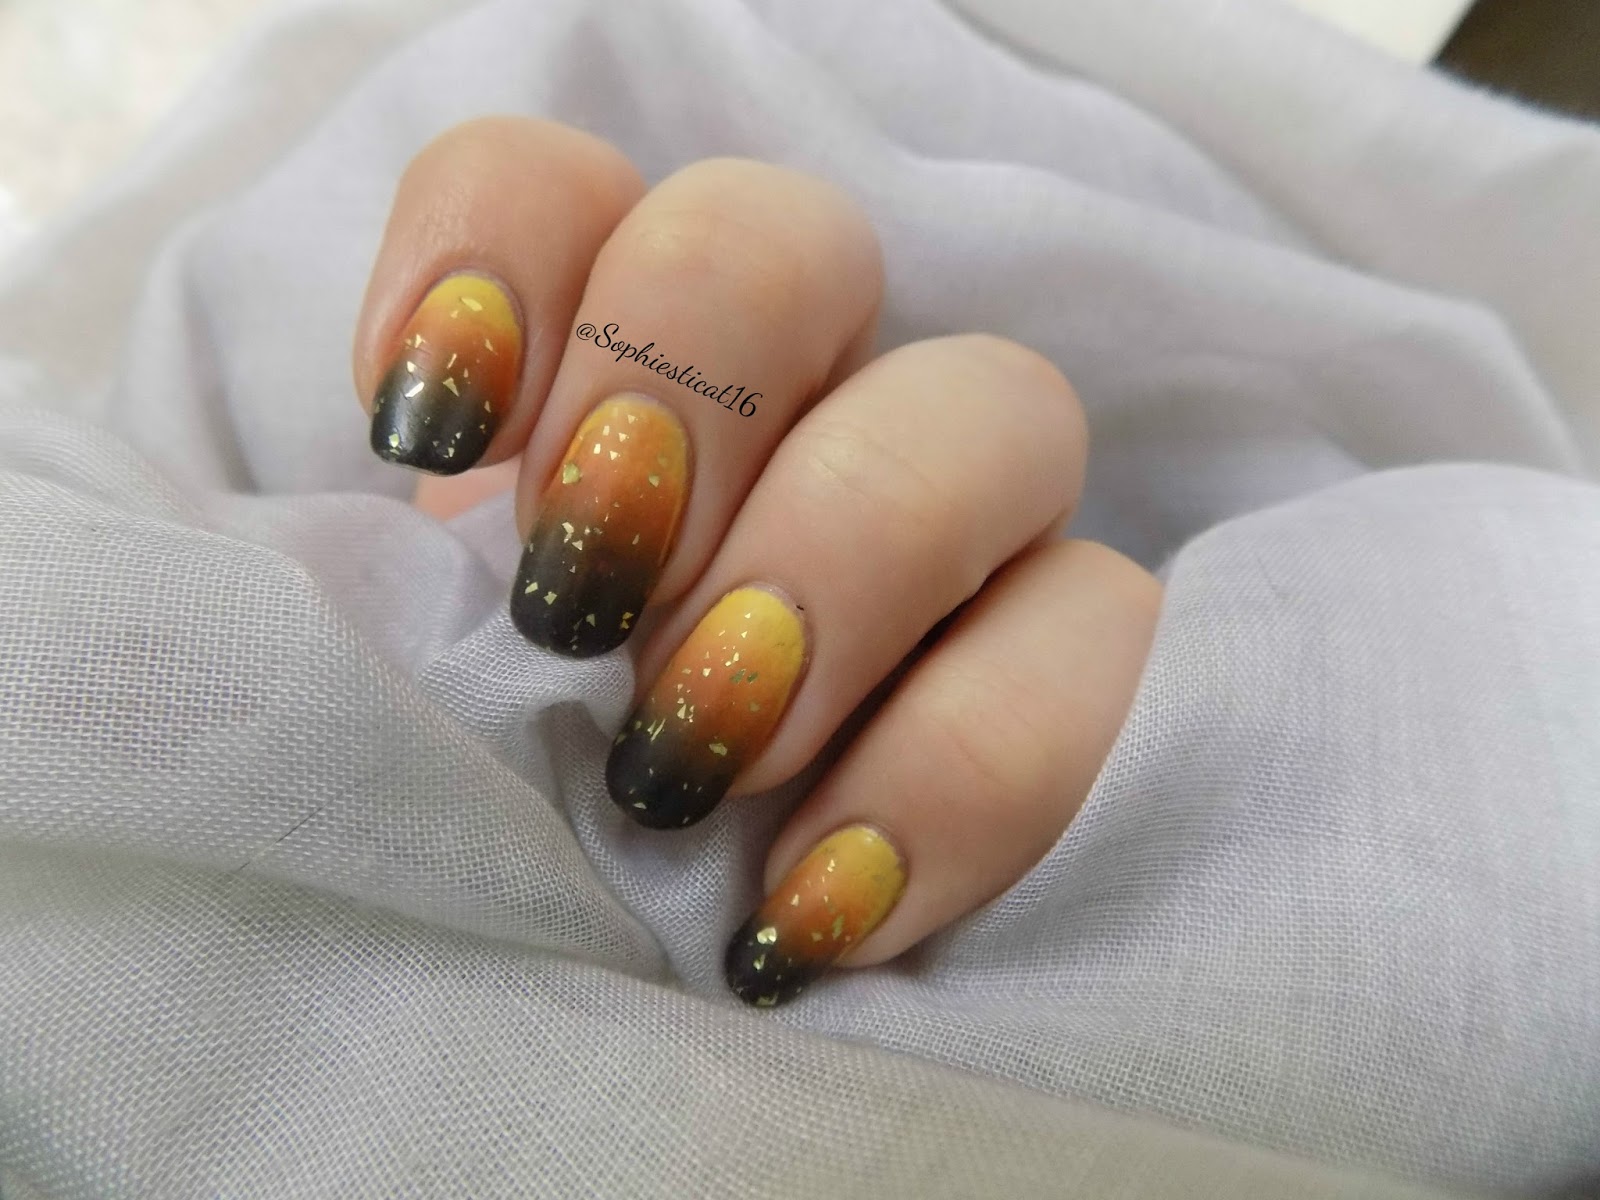 2. "Pumpkin Spice" Inspired Nail Ideas for October - wide 6